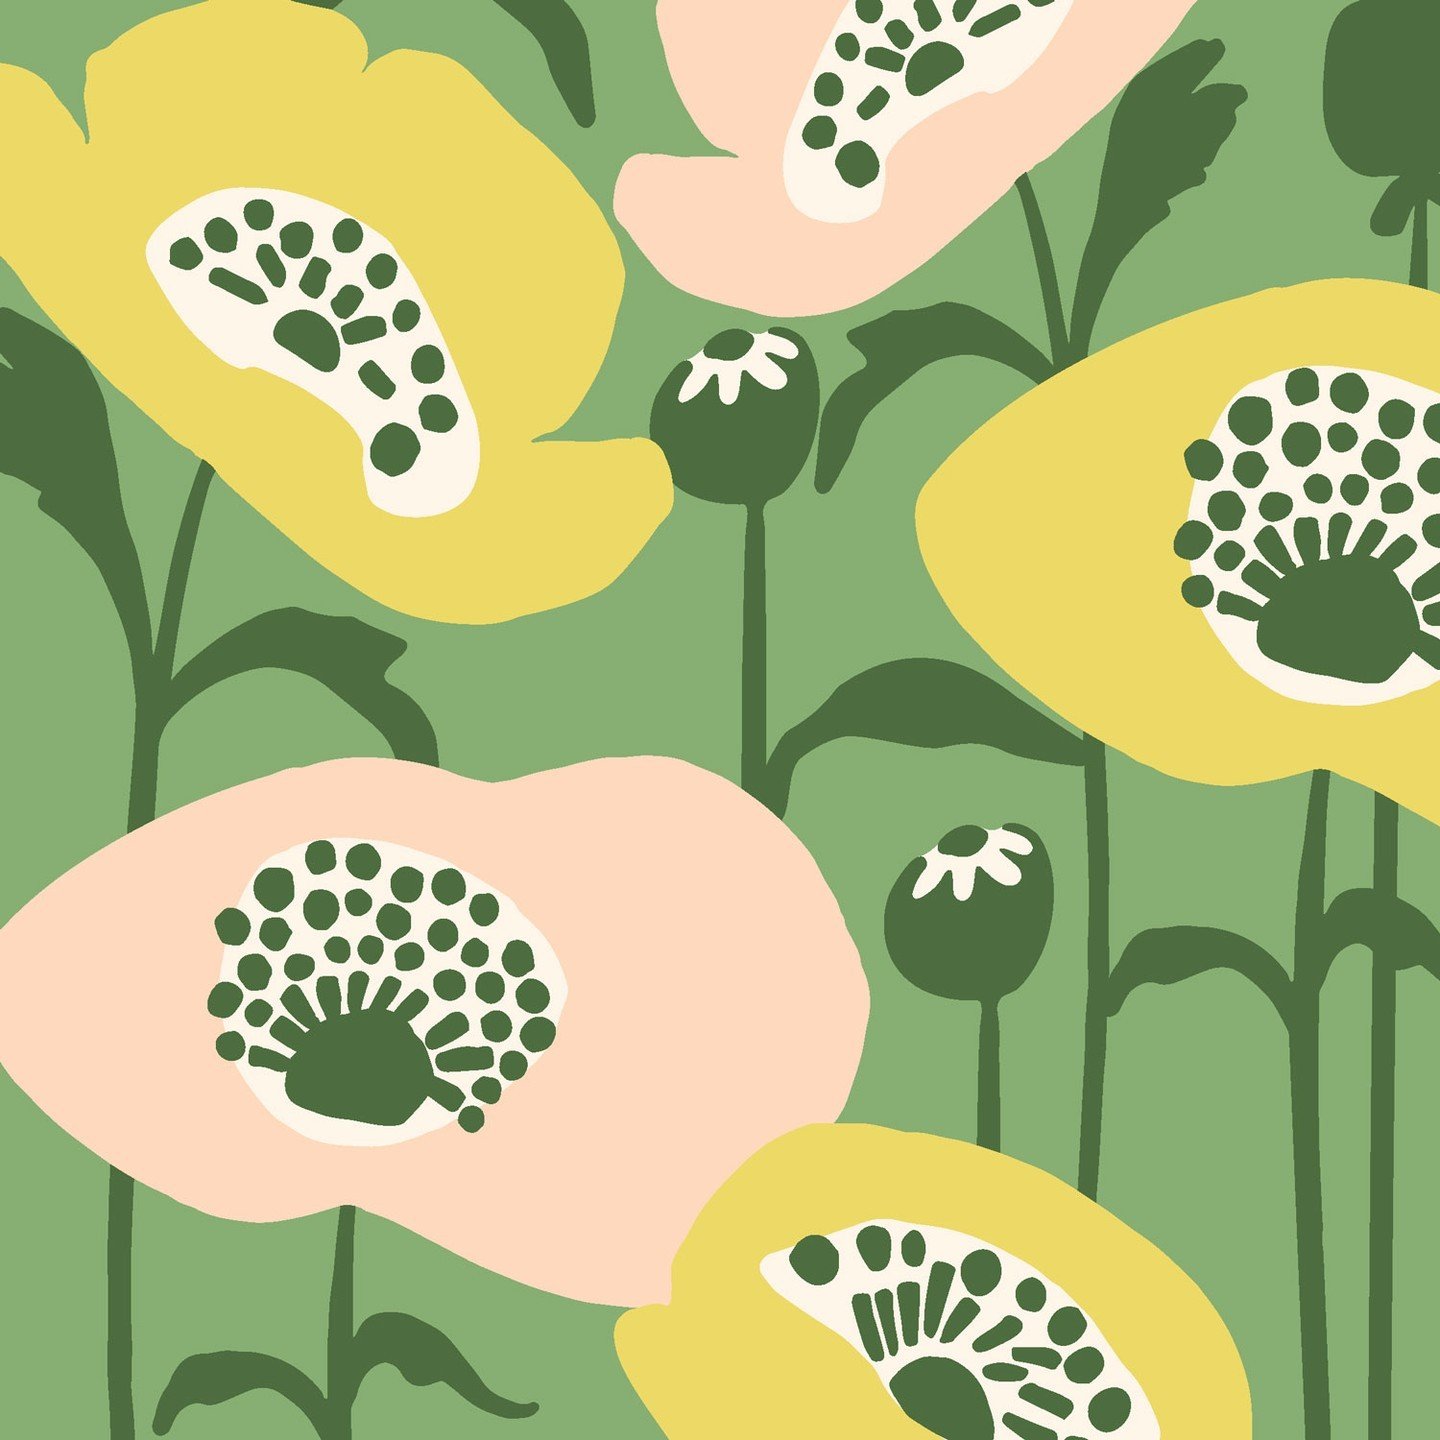 Here is a detail view of my Poppy Pattern. Really enjoying this sage green and pink color combination. It's fresh feeling to me, just like this time of year. Happy Friday and weekend to y'all.⁣
:⁣
#poppyflower⁣
#poppyflowerillustration⁣
#poppypattern